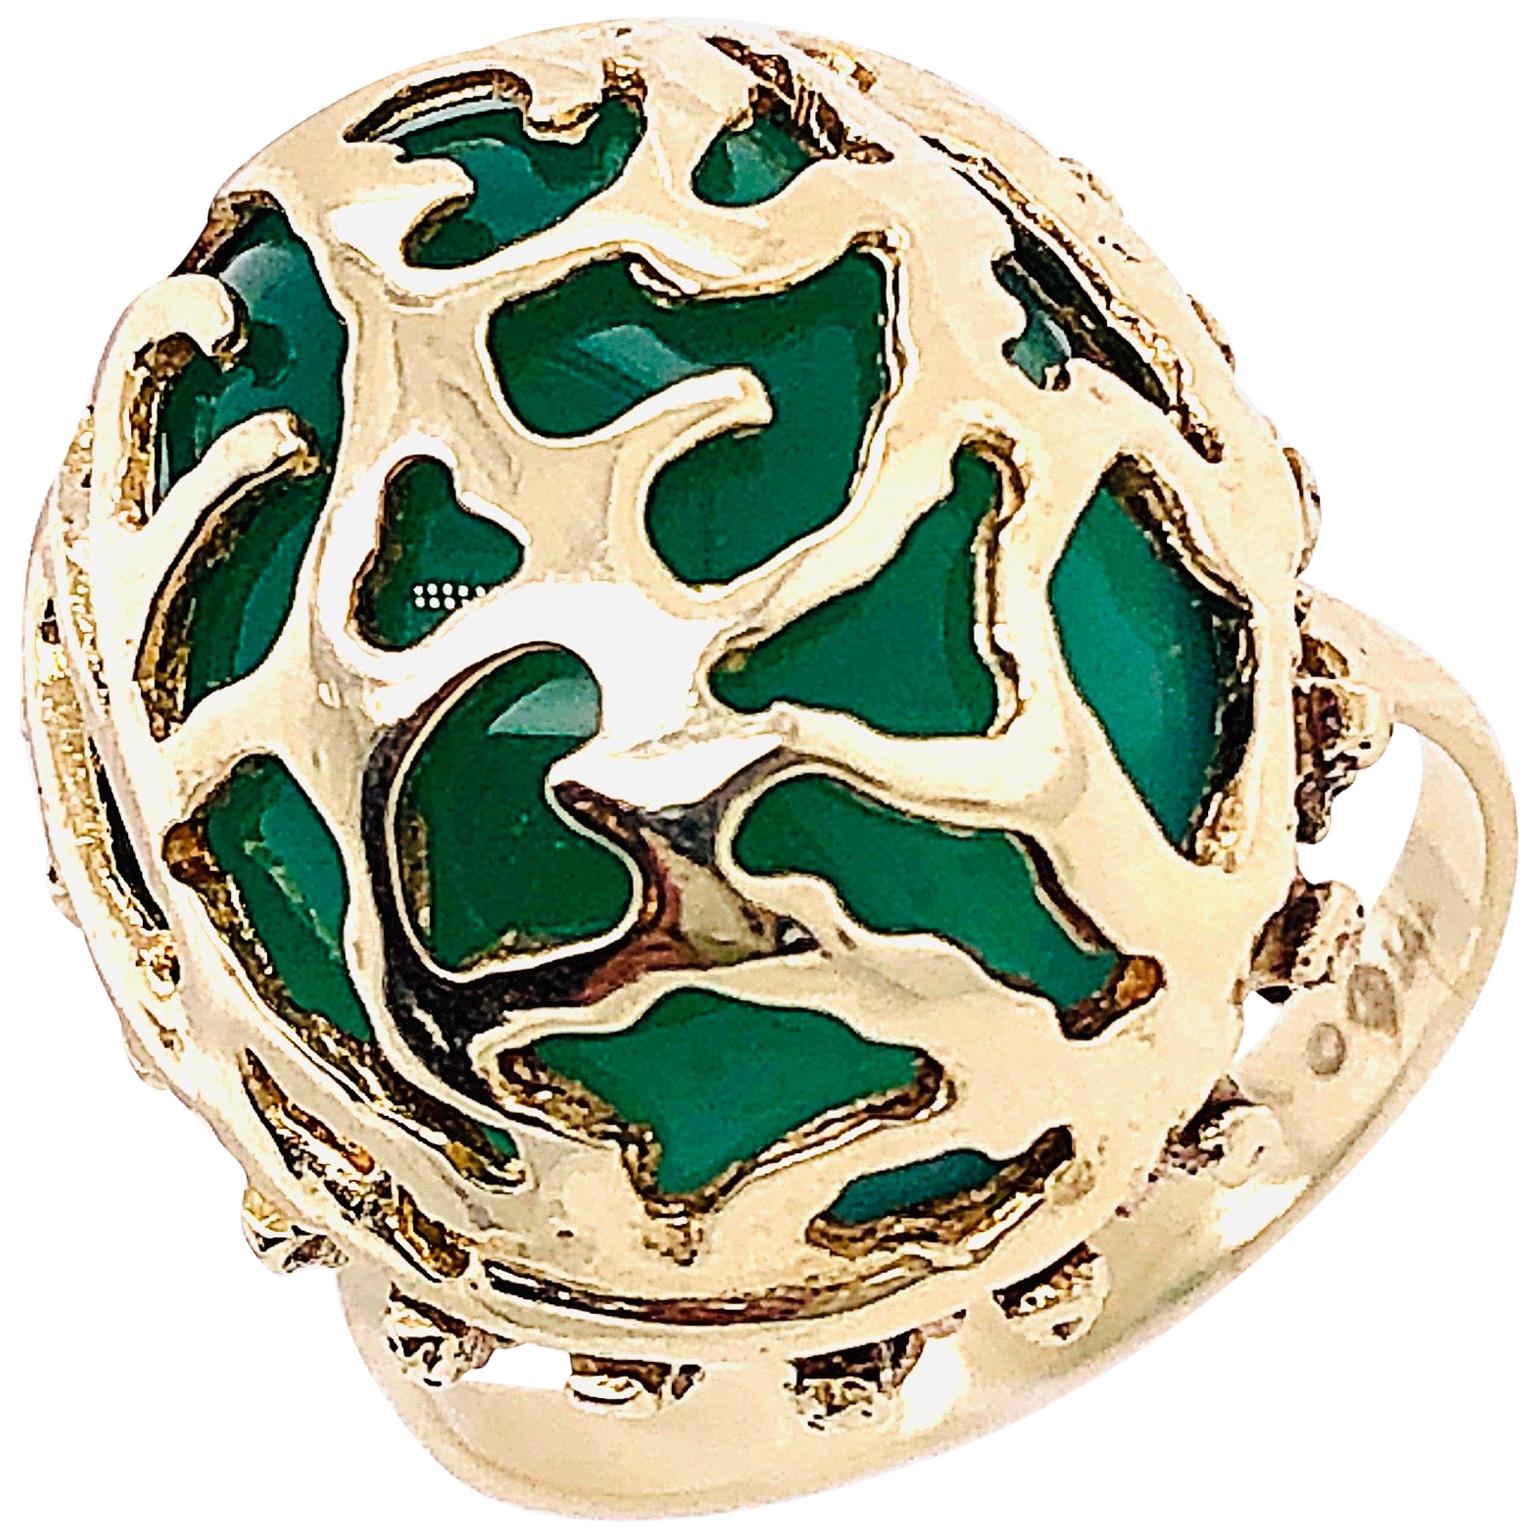 14 Karat Yellow Gold Oval Green Onyx with Filigree Overlay Solitaire Ring